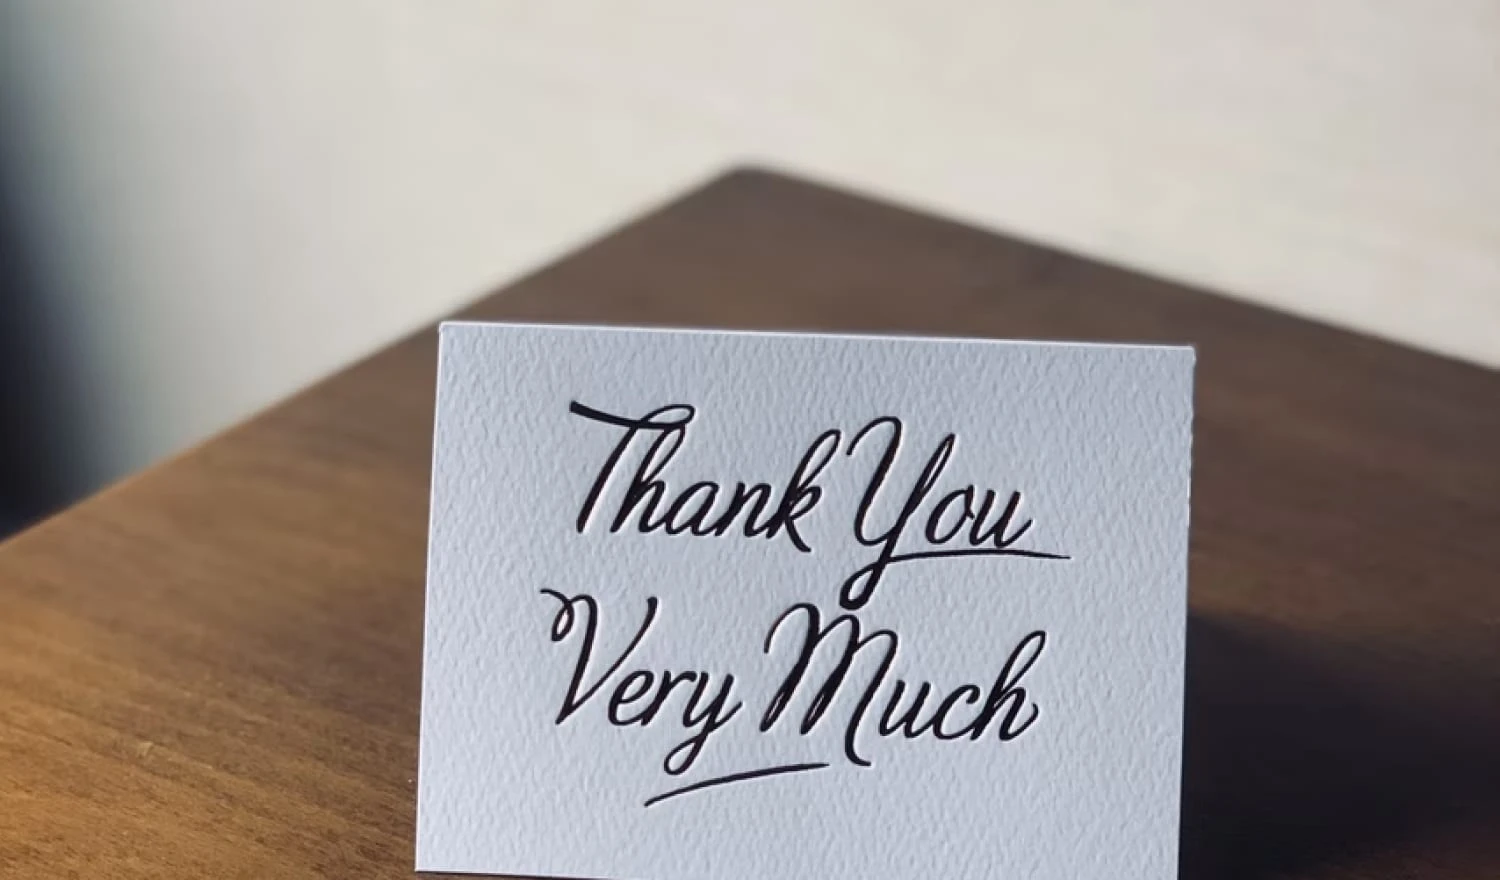 A witty Thank You card